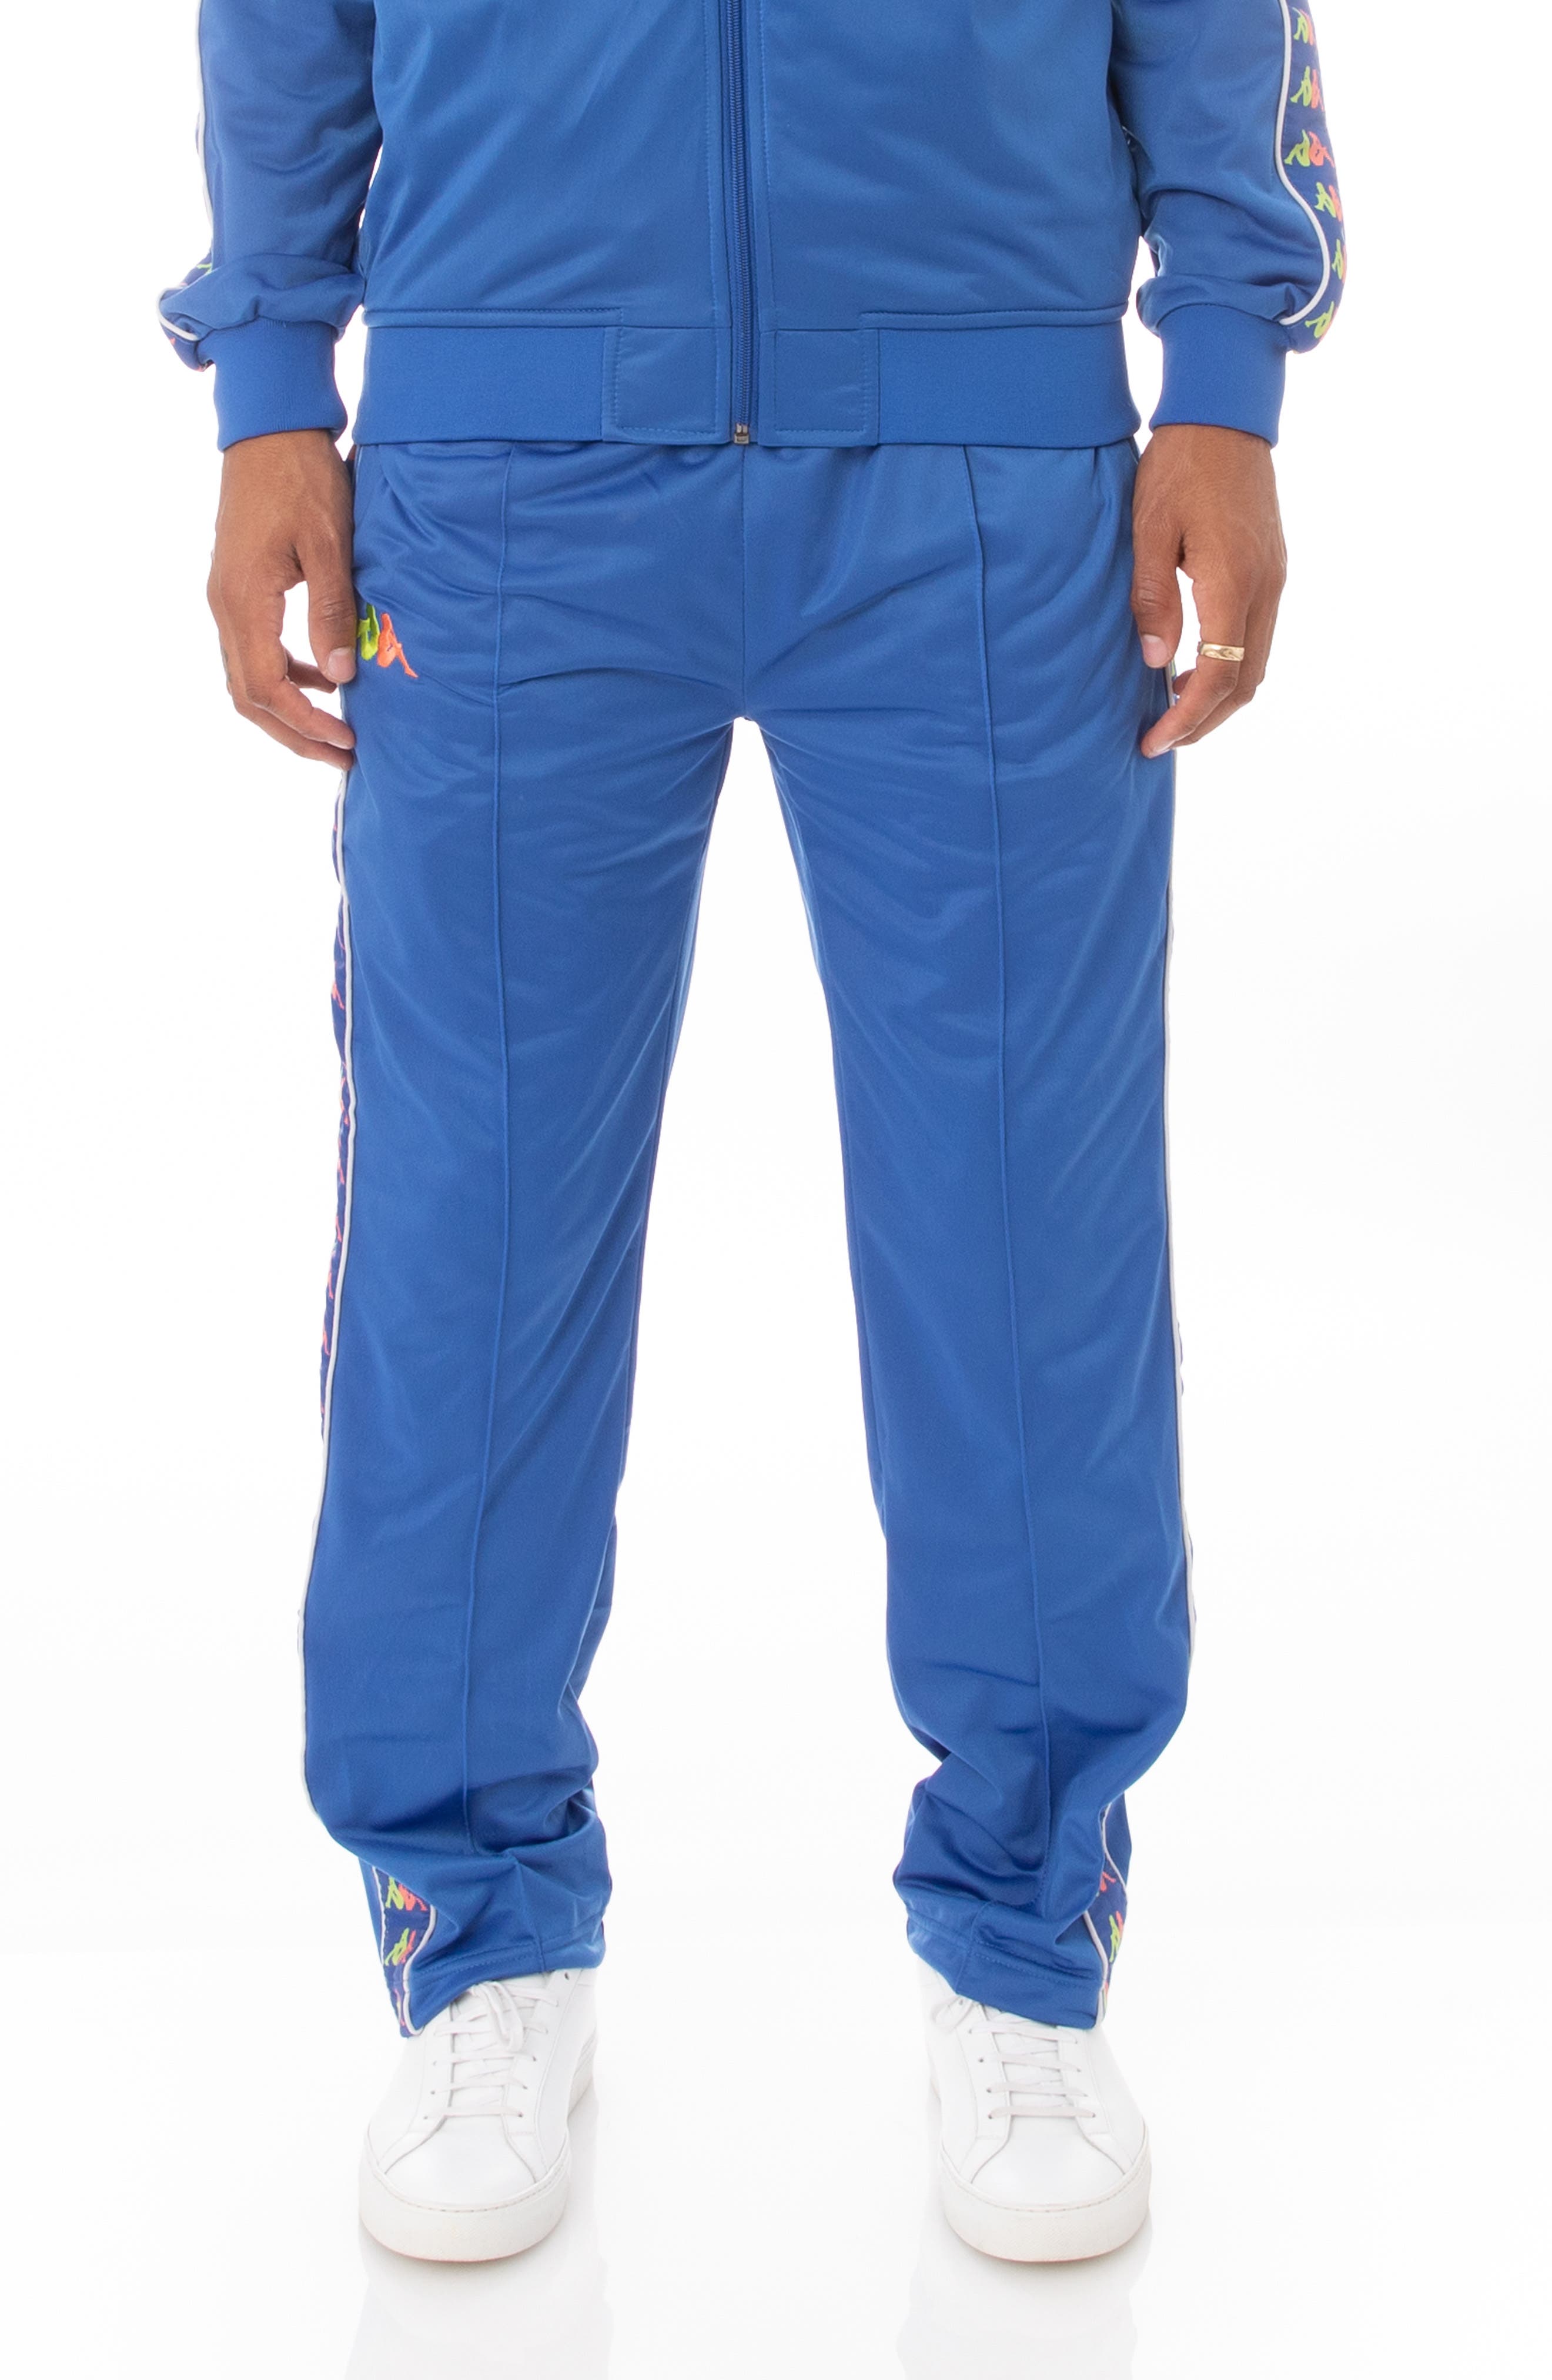 Kappa 222 Banda Amphitheater Track Pants in Bl Lpis-Grn Lim-Orng-Gry Ash at Nordstrom, Size Small